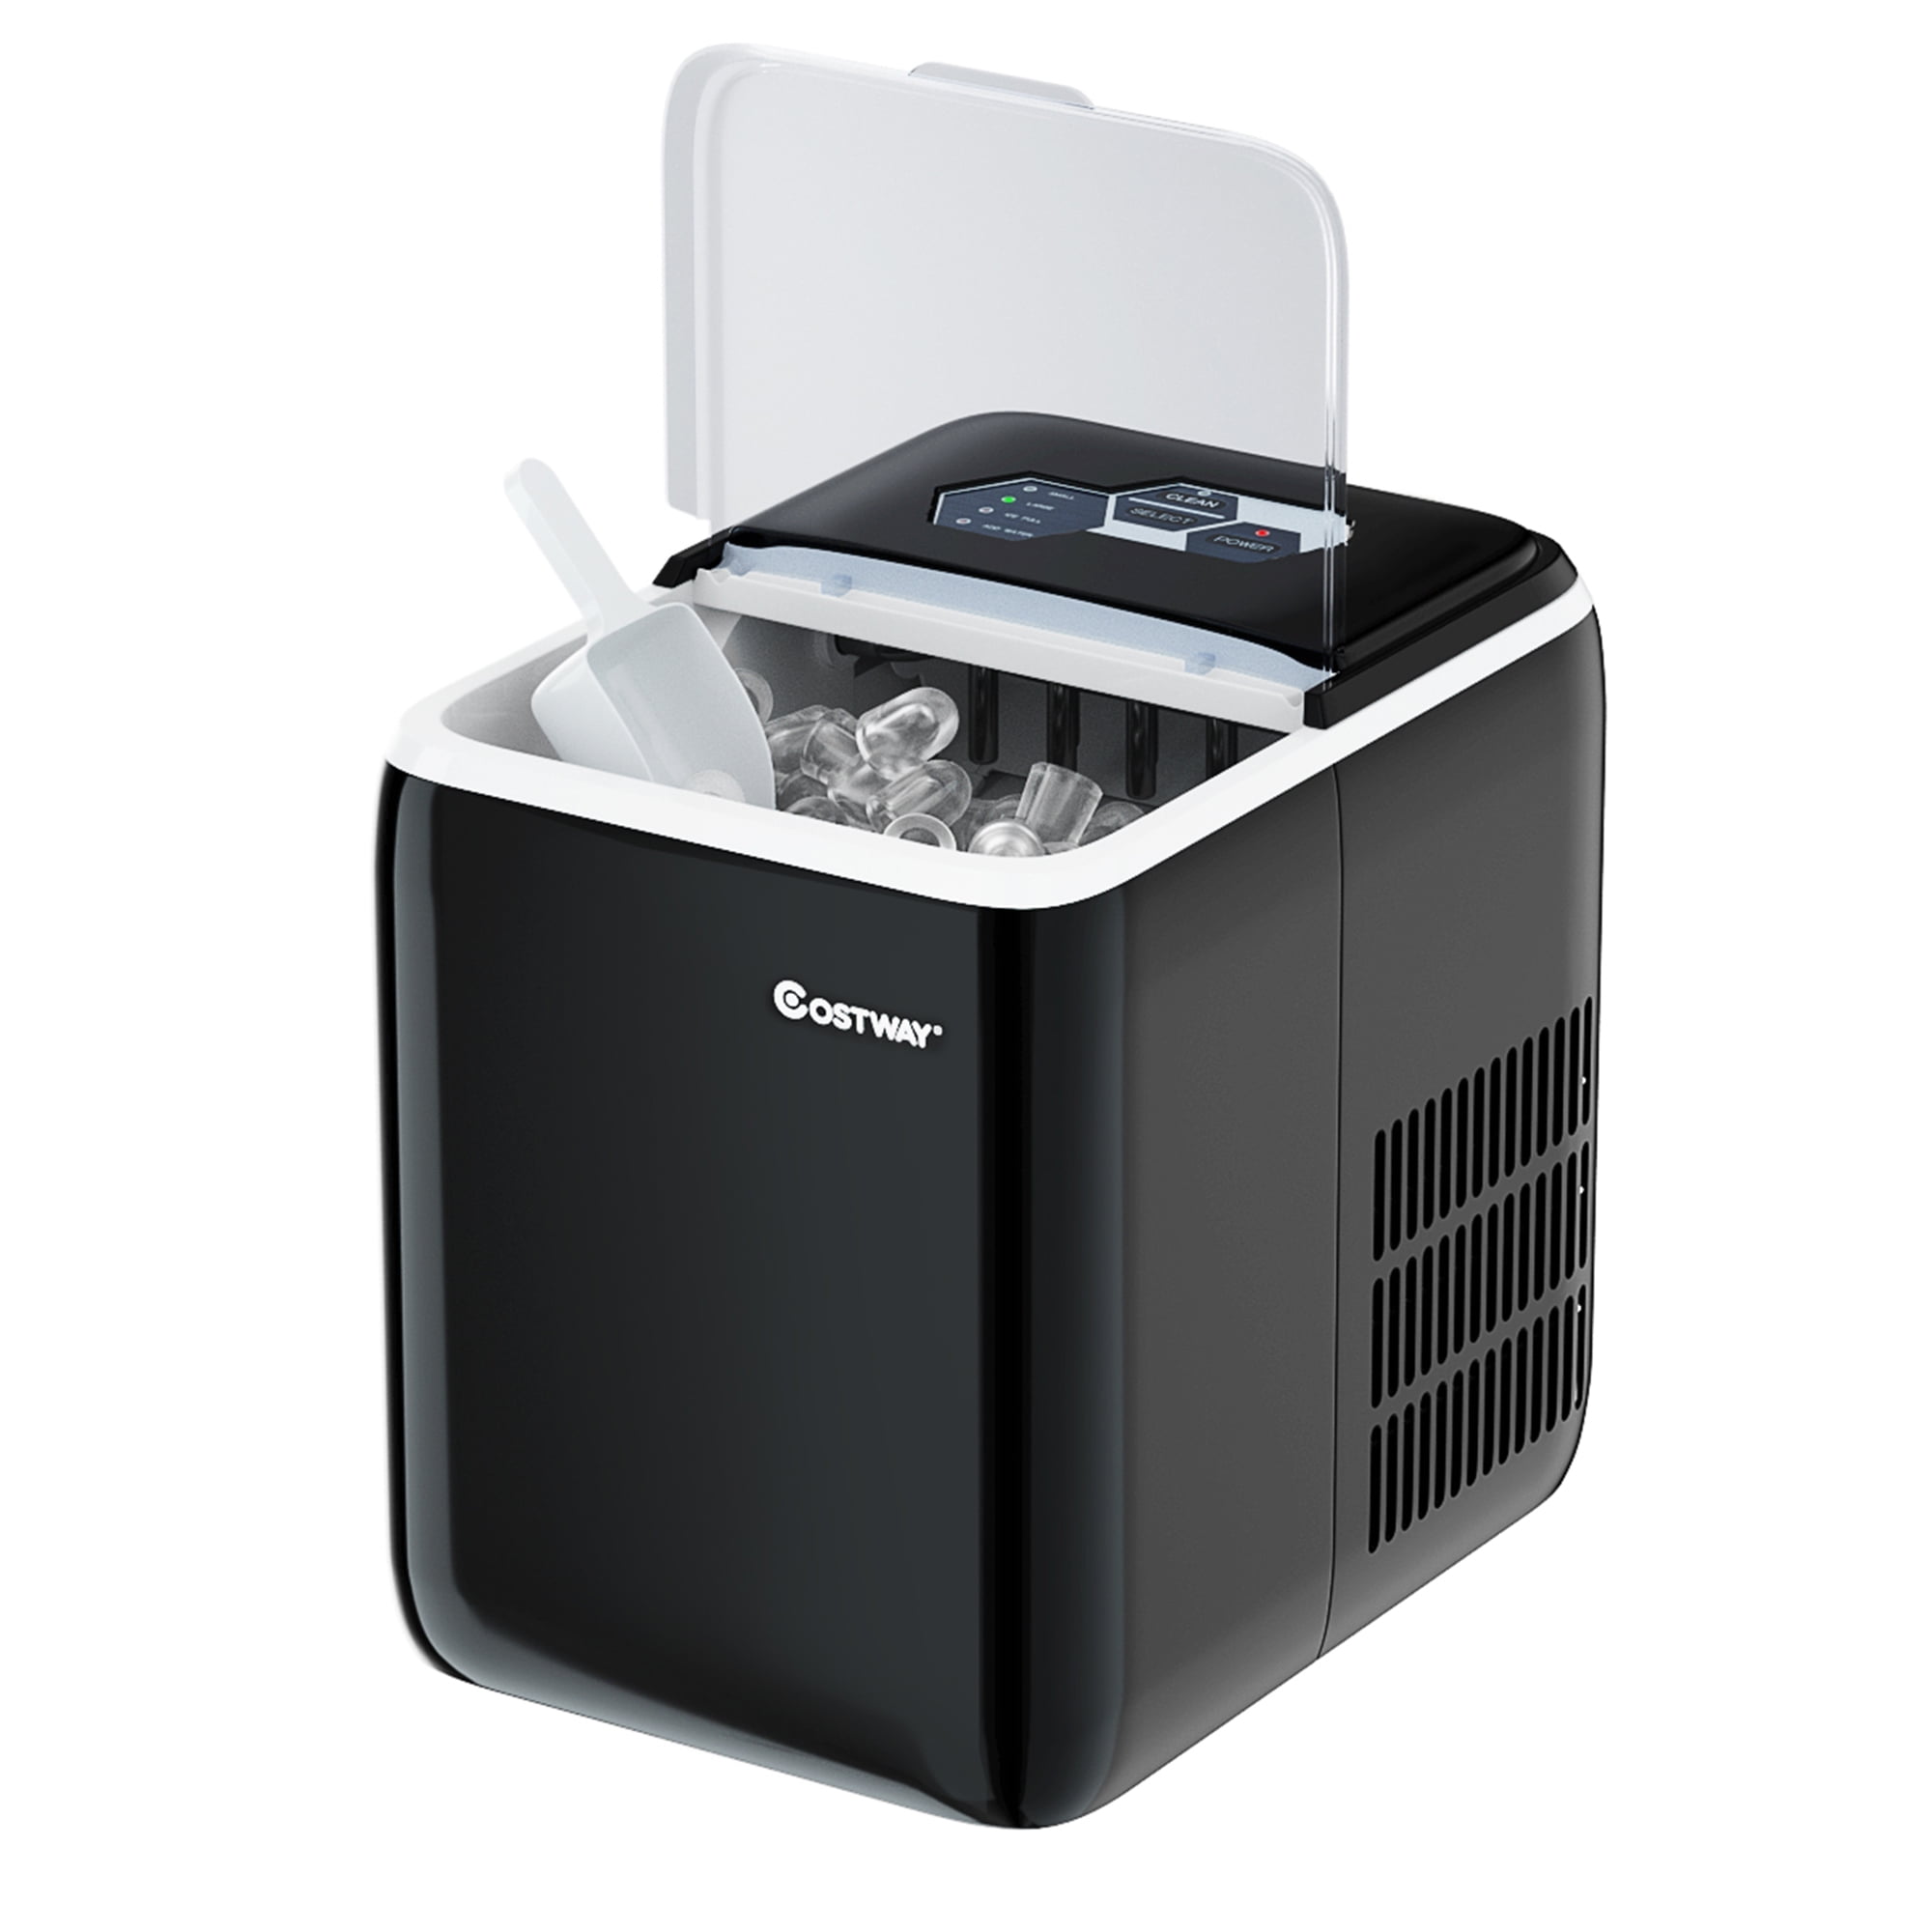 Elexnux 44 lbs. Freestanding Ice Maker in Black, Auto Self-Cleaning, Easy  to Use and Apply to Home Kitchen Bar Party NBHKIM23032801 - The Home Depot